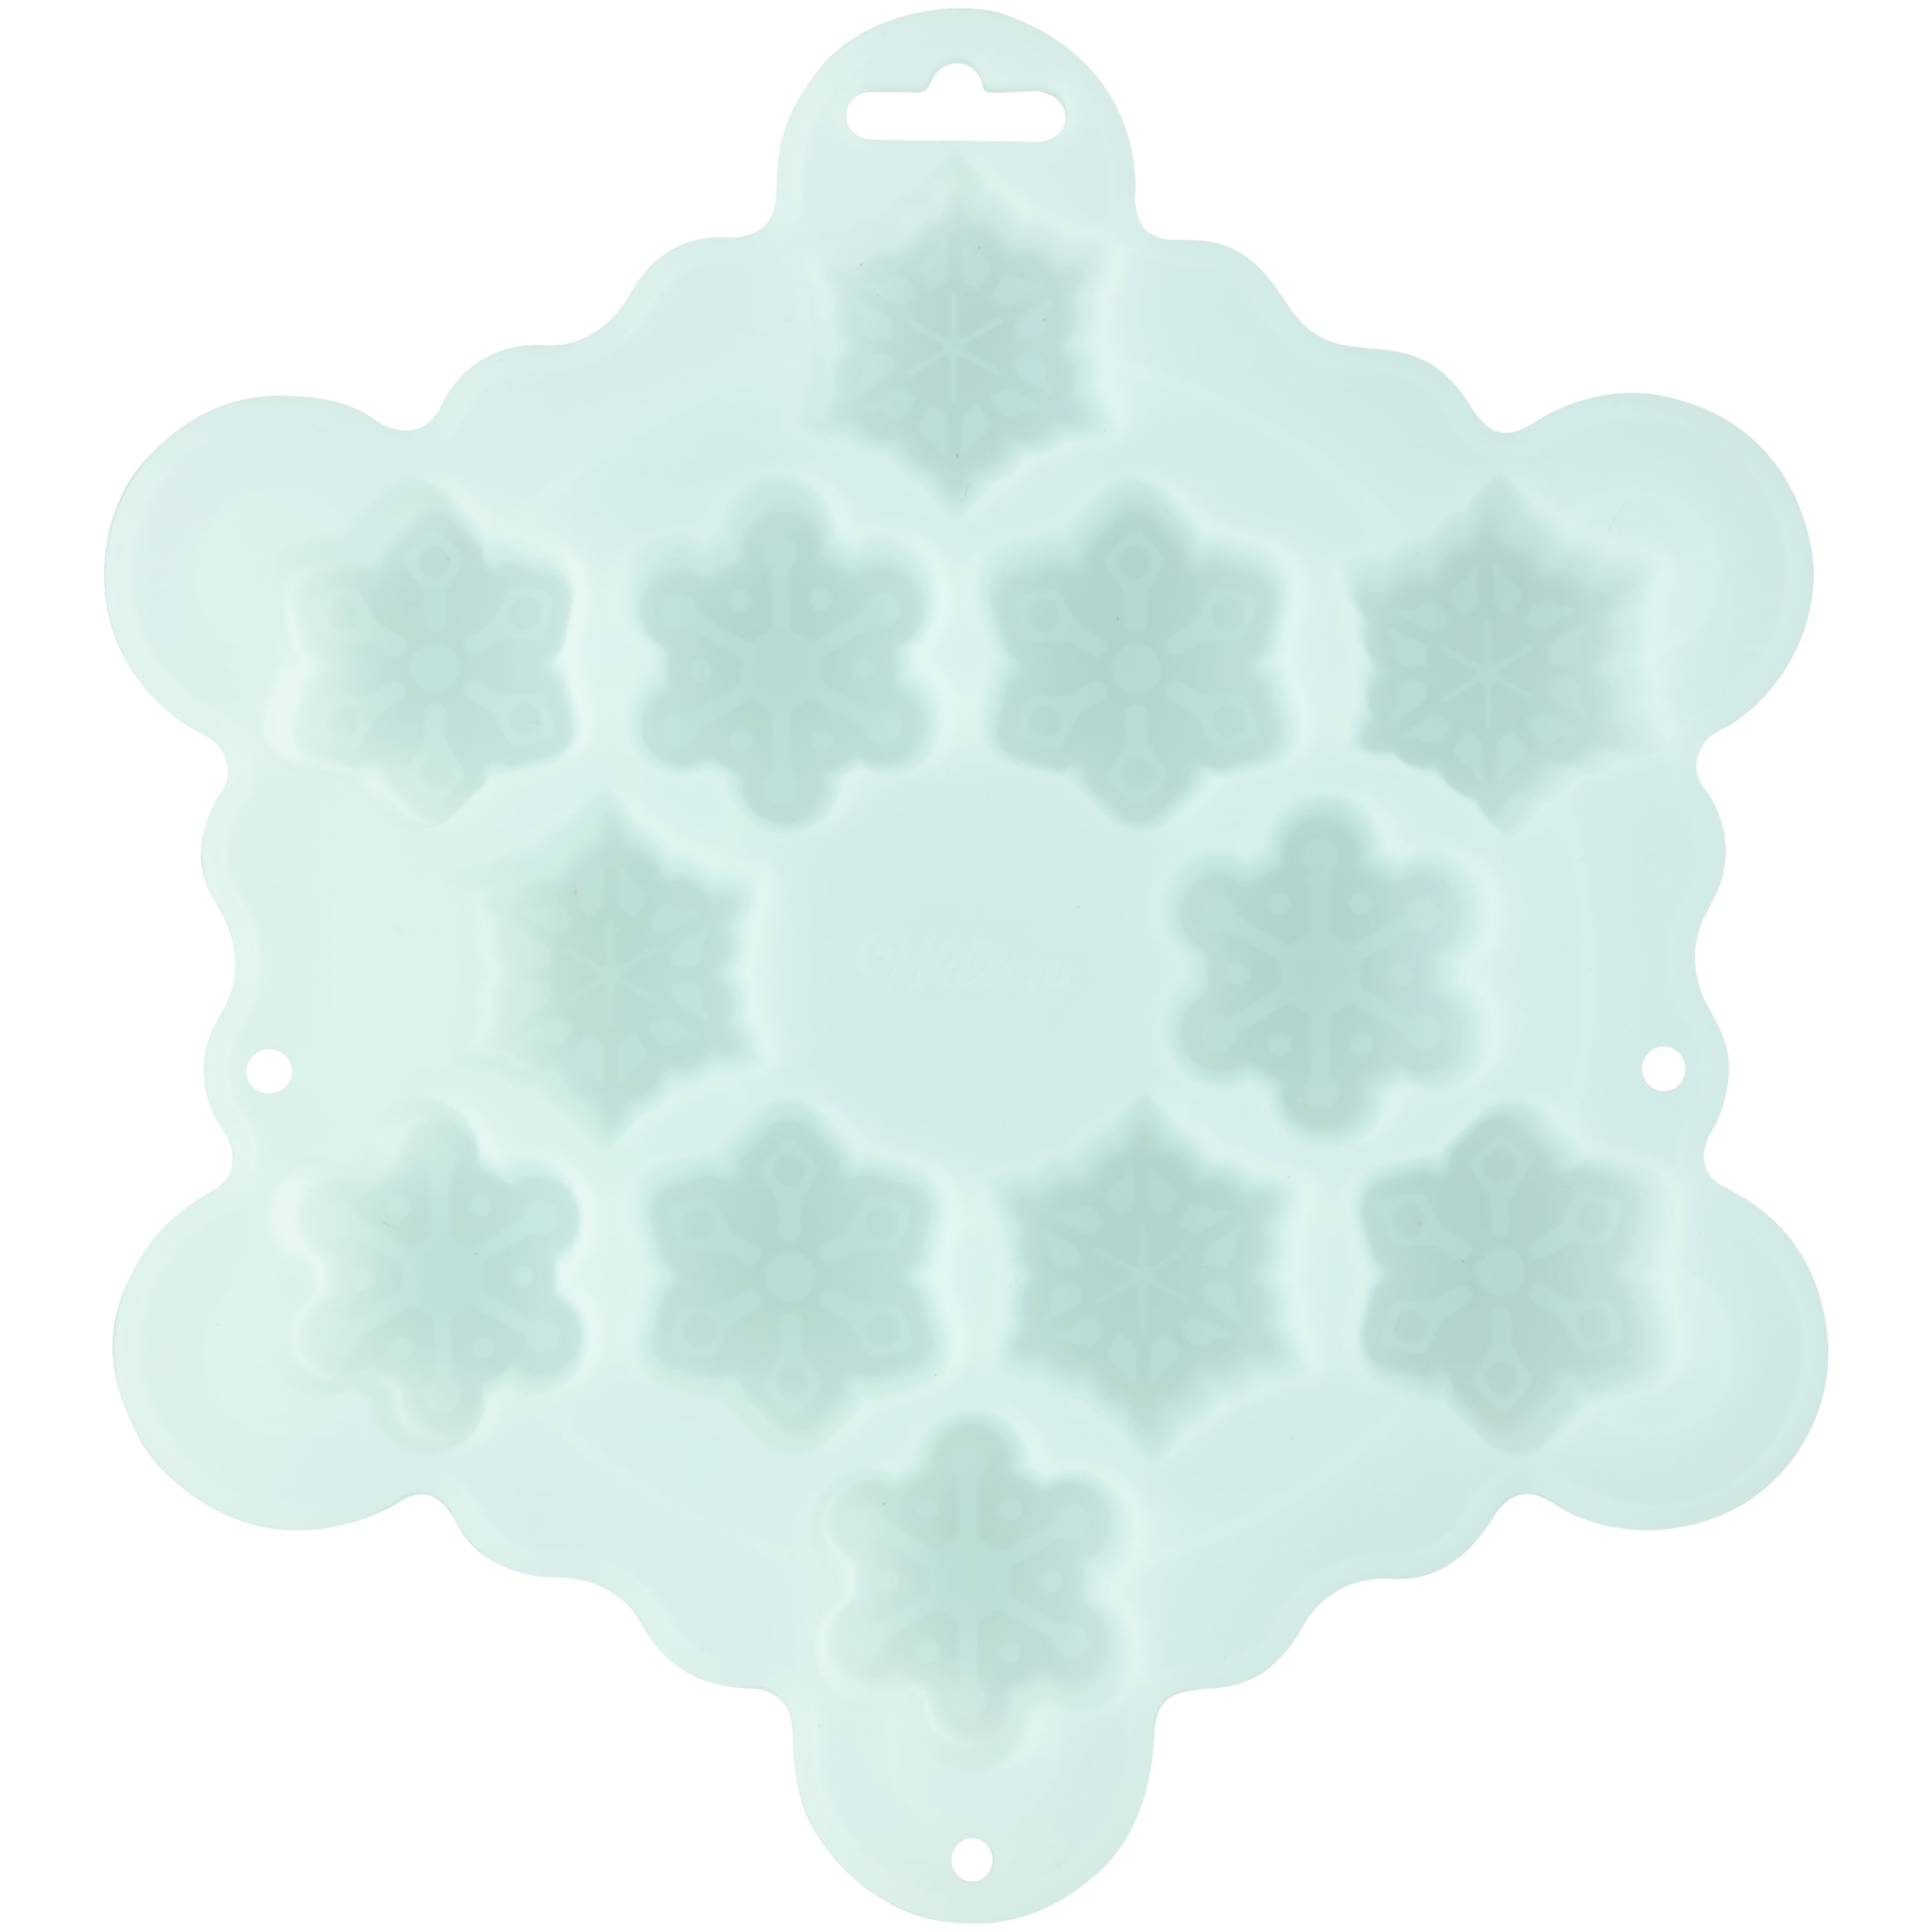 6 Cavity Different Snowflake Silicone Cake Mold